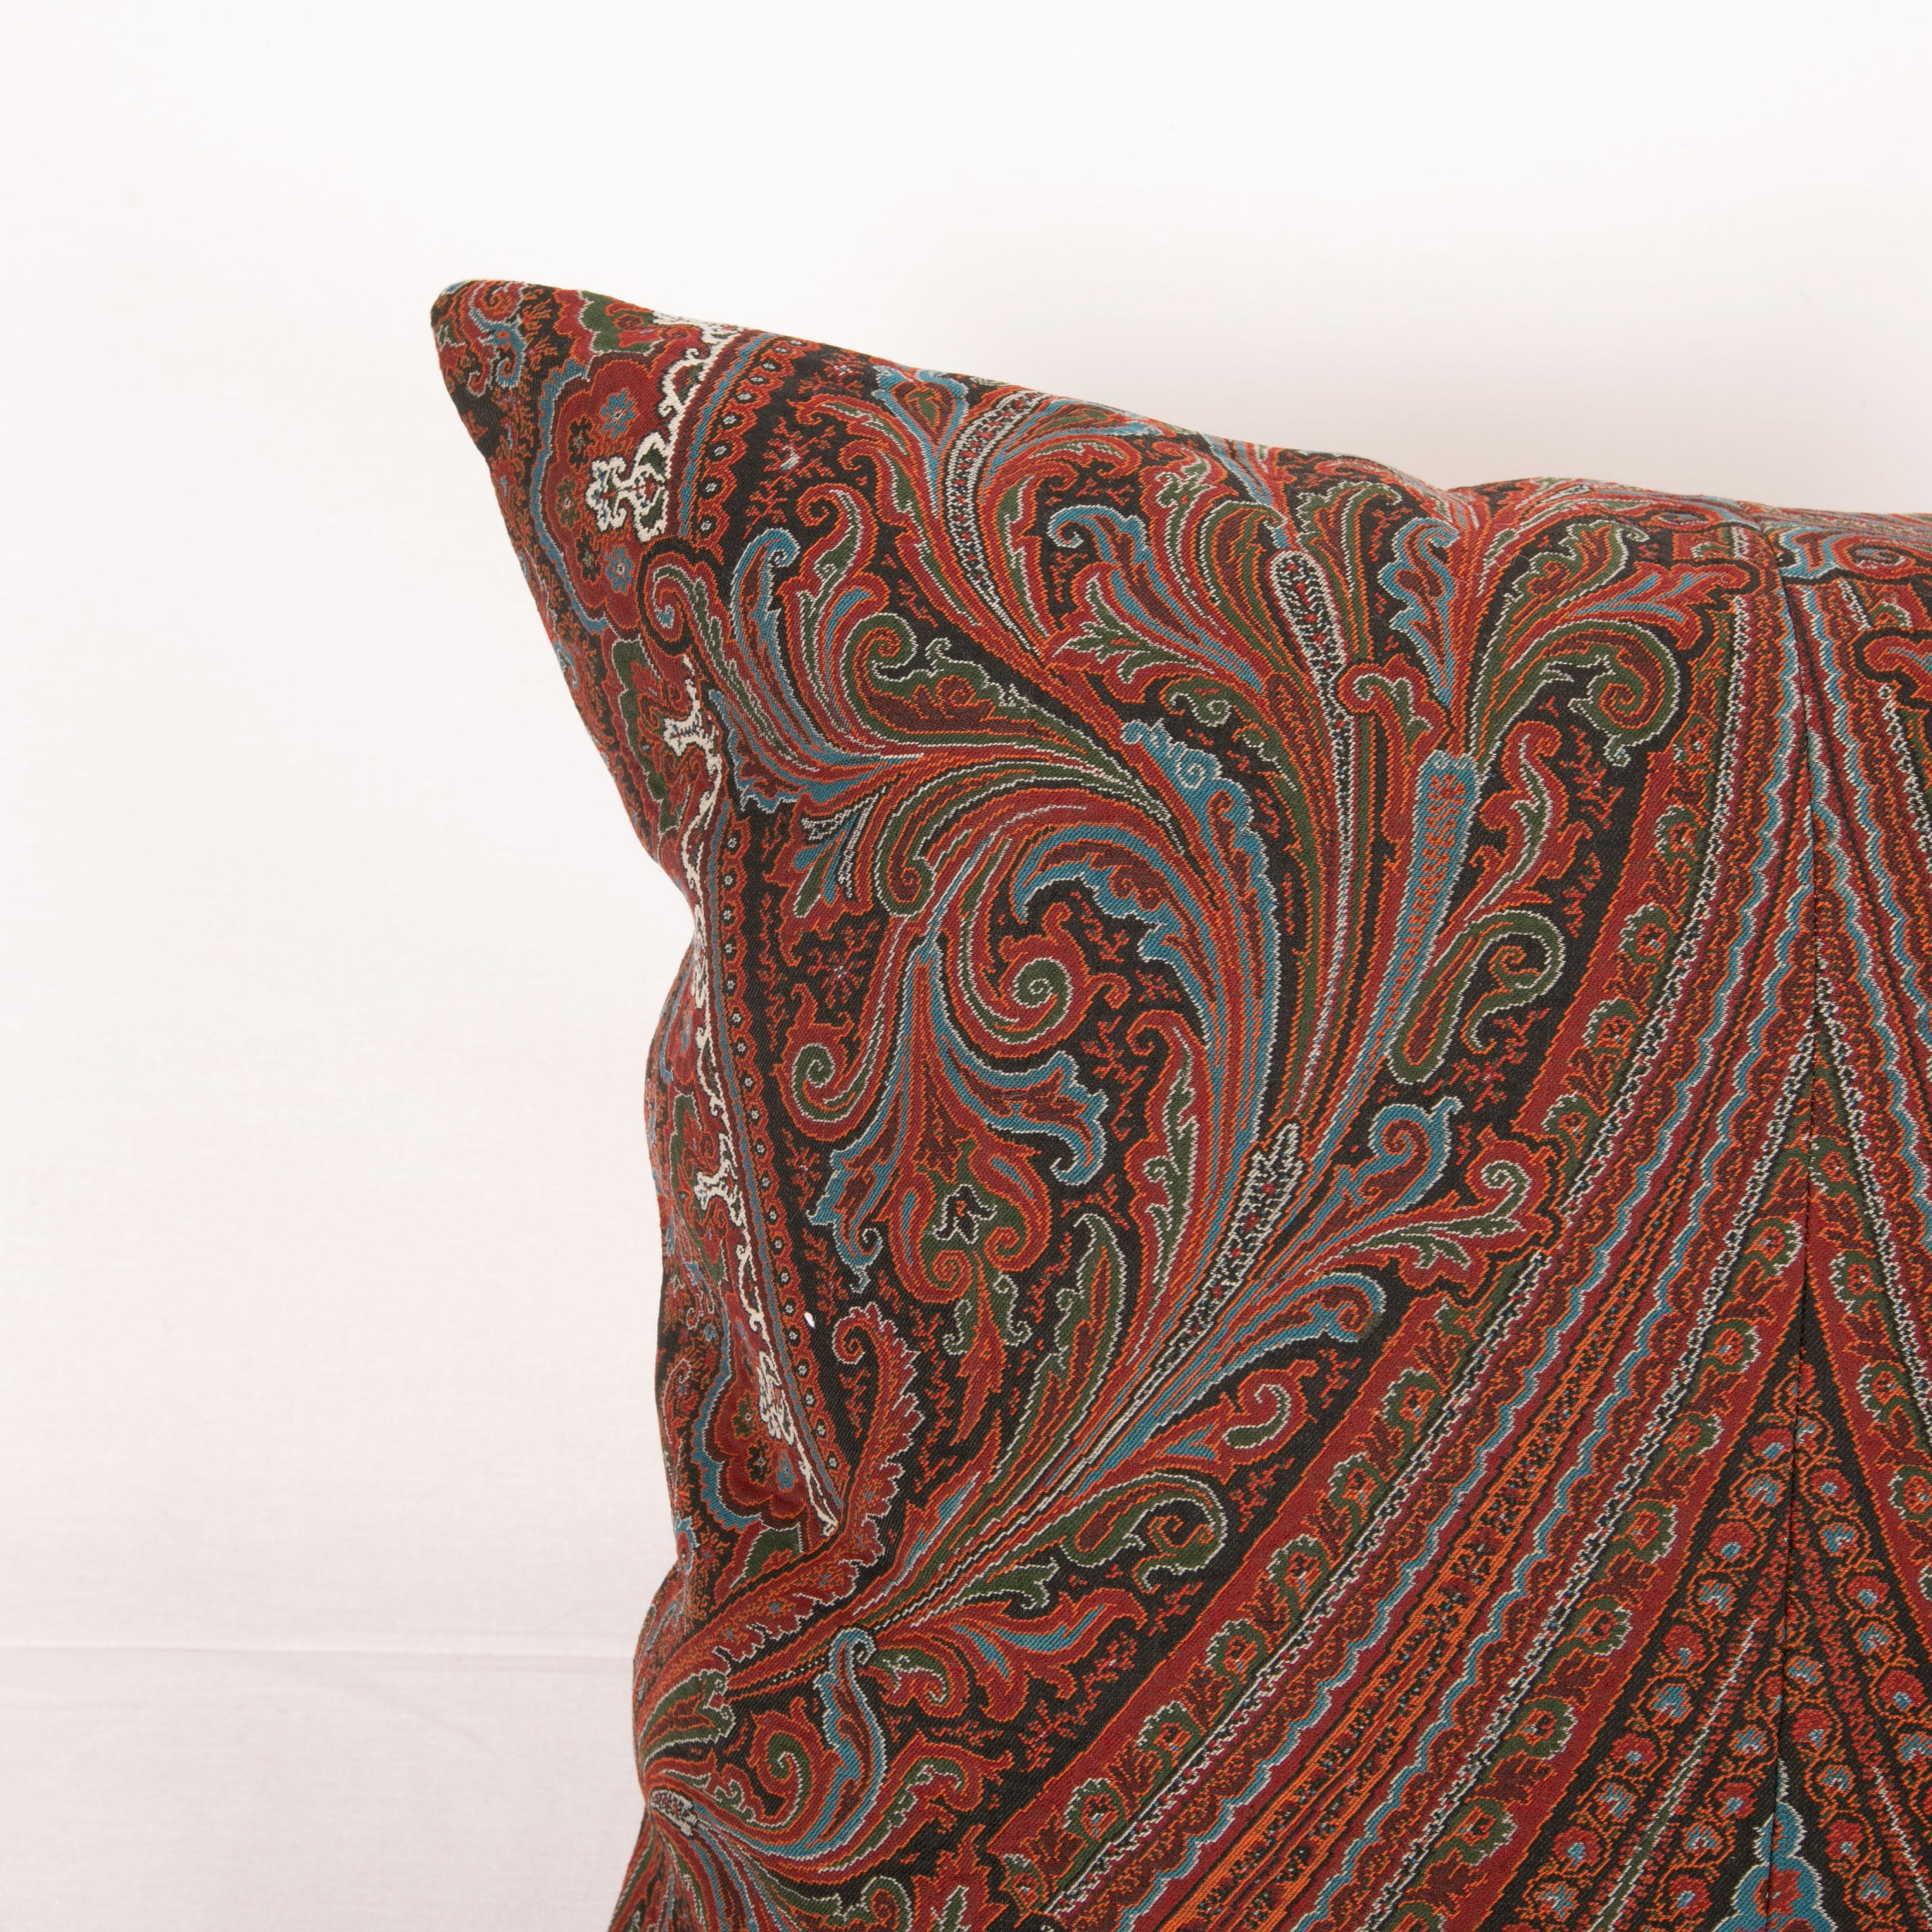 French Antique Paisley Shawl Pillow, 19th C.